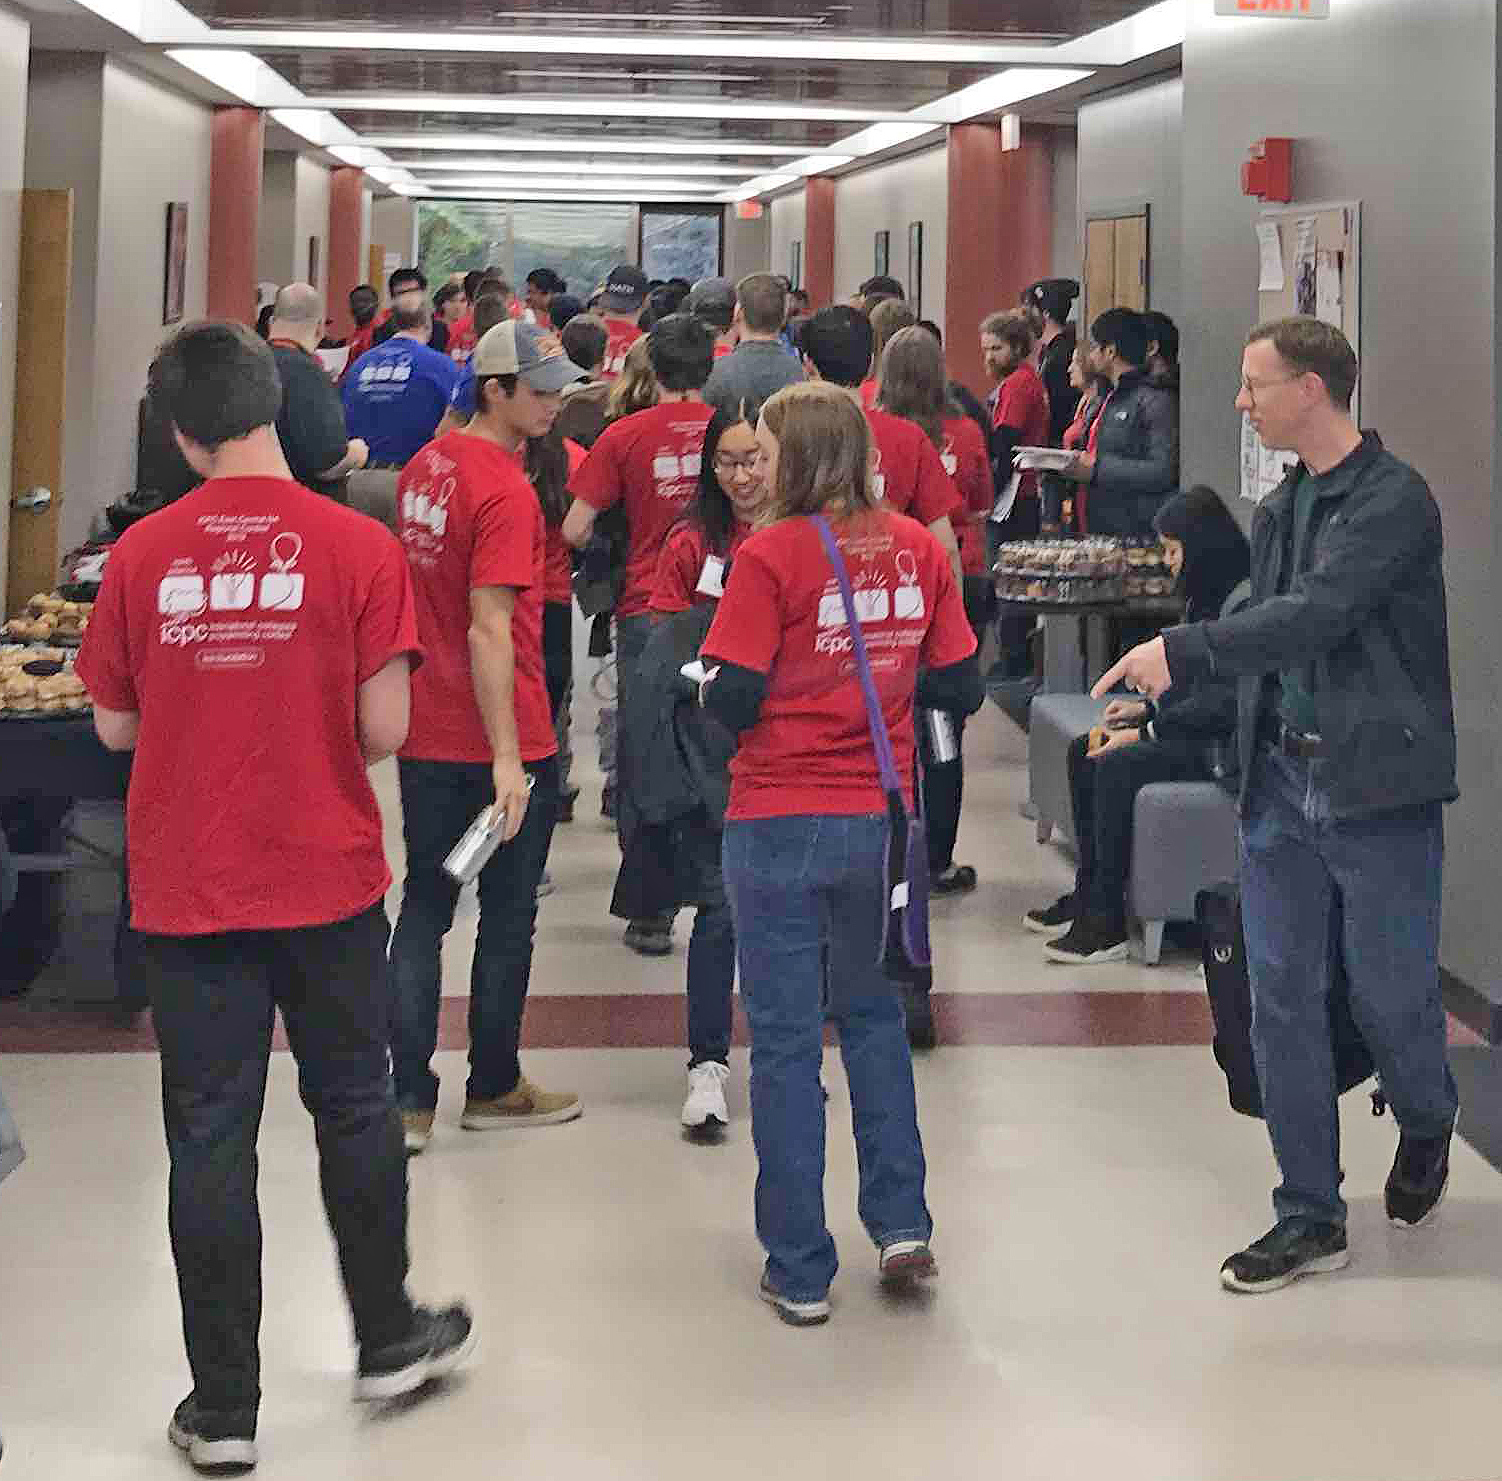 More than 40 teams of students from 16 universities were at YSU for the international competition